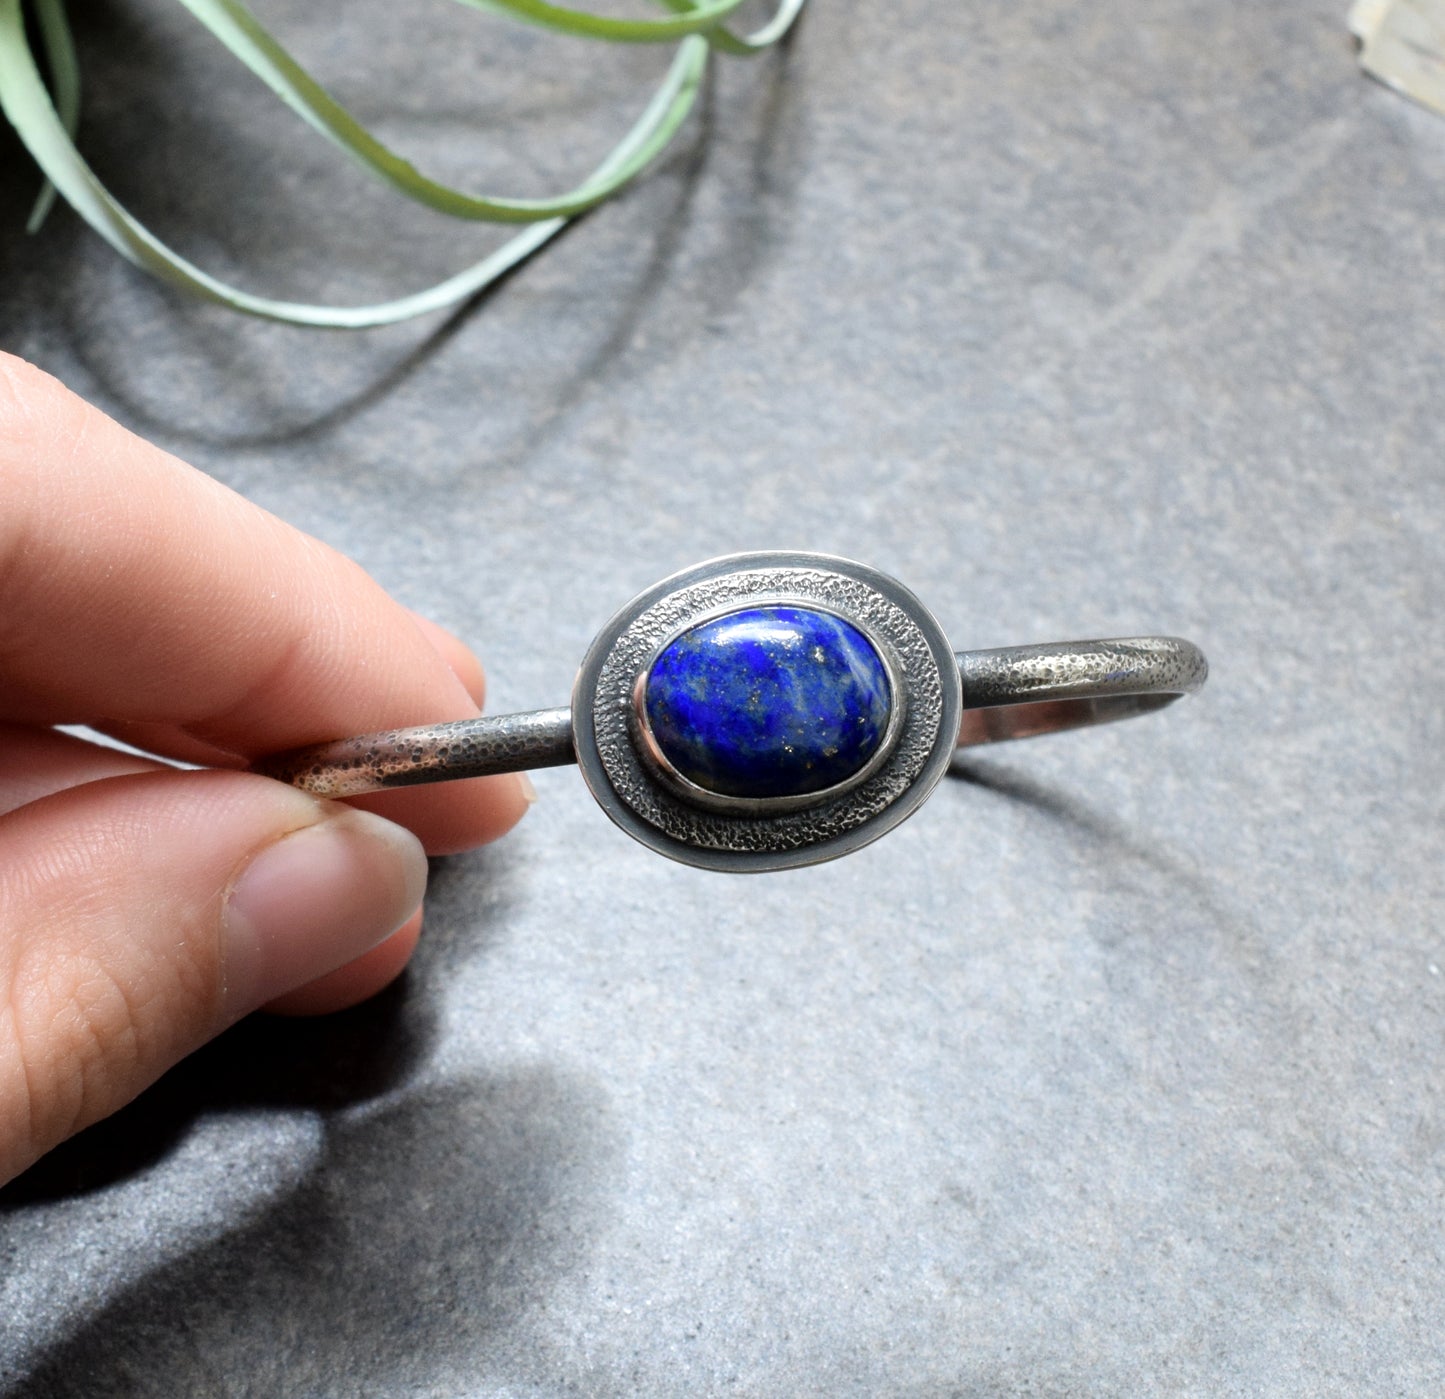 Sterling Silver Cuff Bracelet Featuring Lapis Lazuli Gemstone with Pyrite